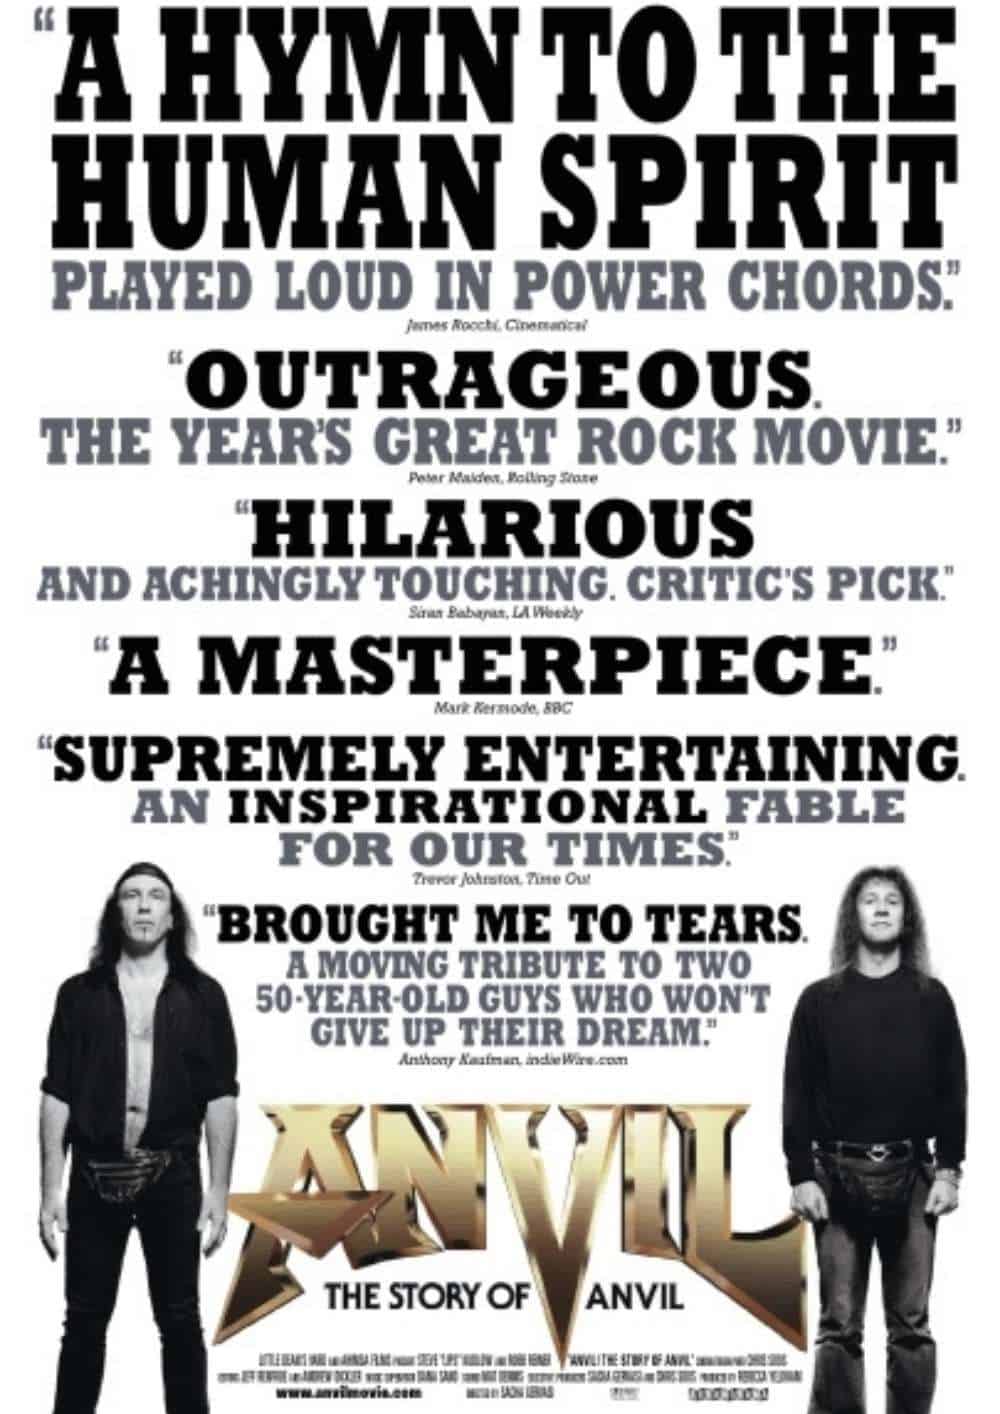 Anvil (2008) Best Rock Movies to Watch